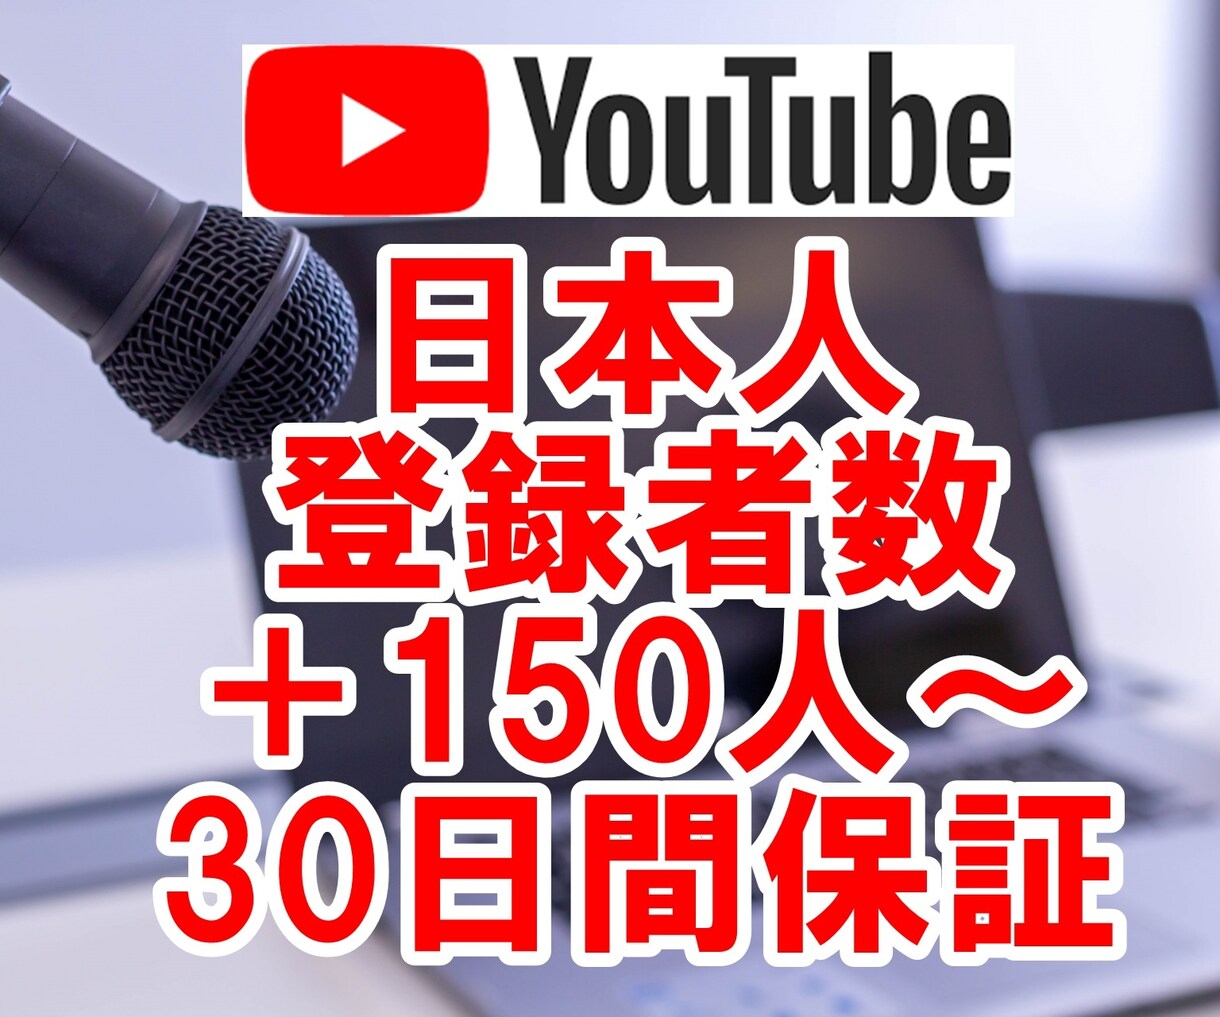 💬Coconala ｜ Increase the number of Japanese subscribers on YouTube by +150 people
               Masayan @ Helping you work and live safely and securely
      …